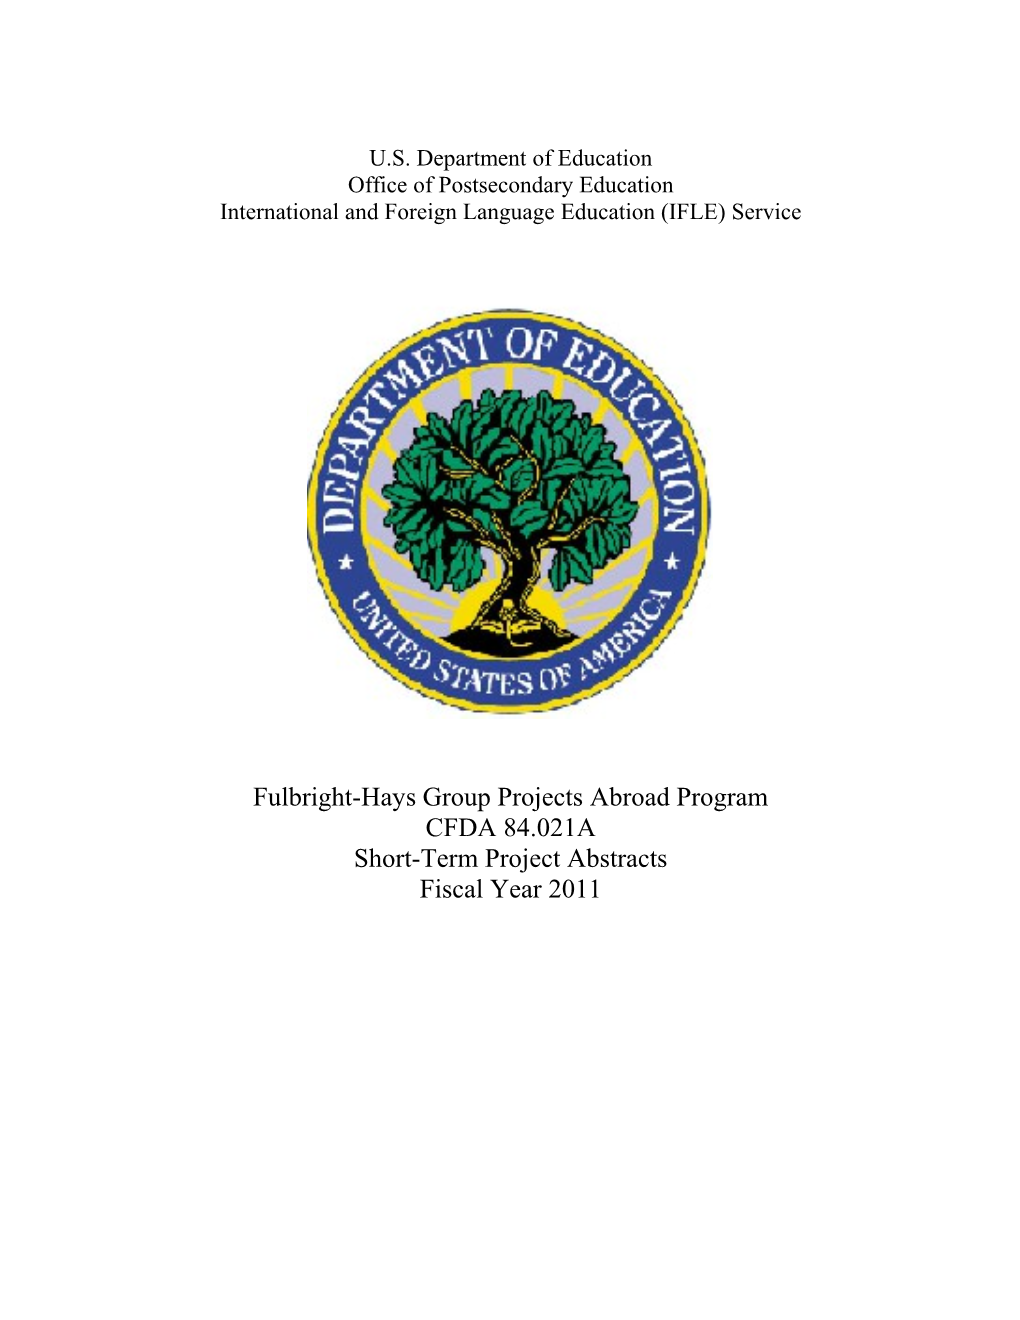 FY 2011 Project Abstracts Under the Fulbright-Hays Group Projects Abroad Program (MS Word)